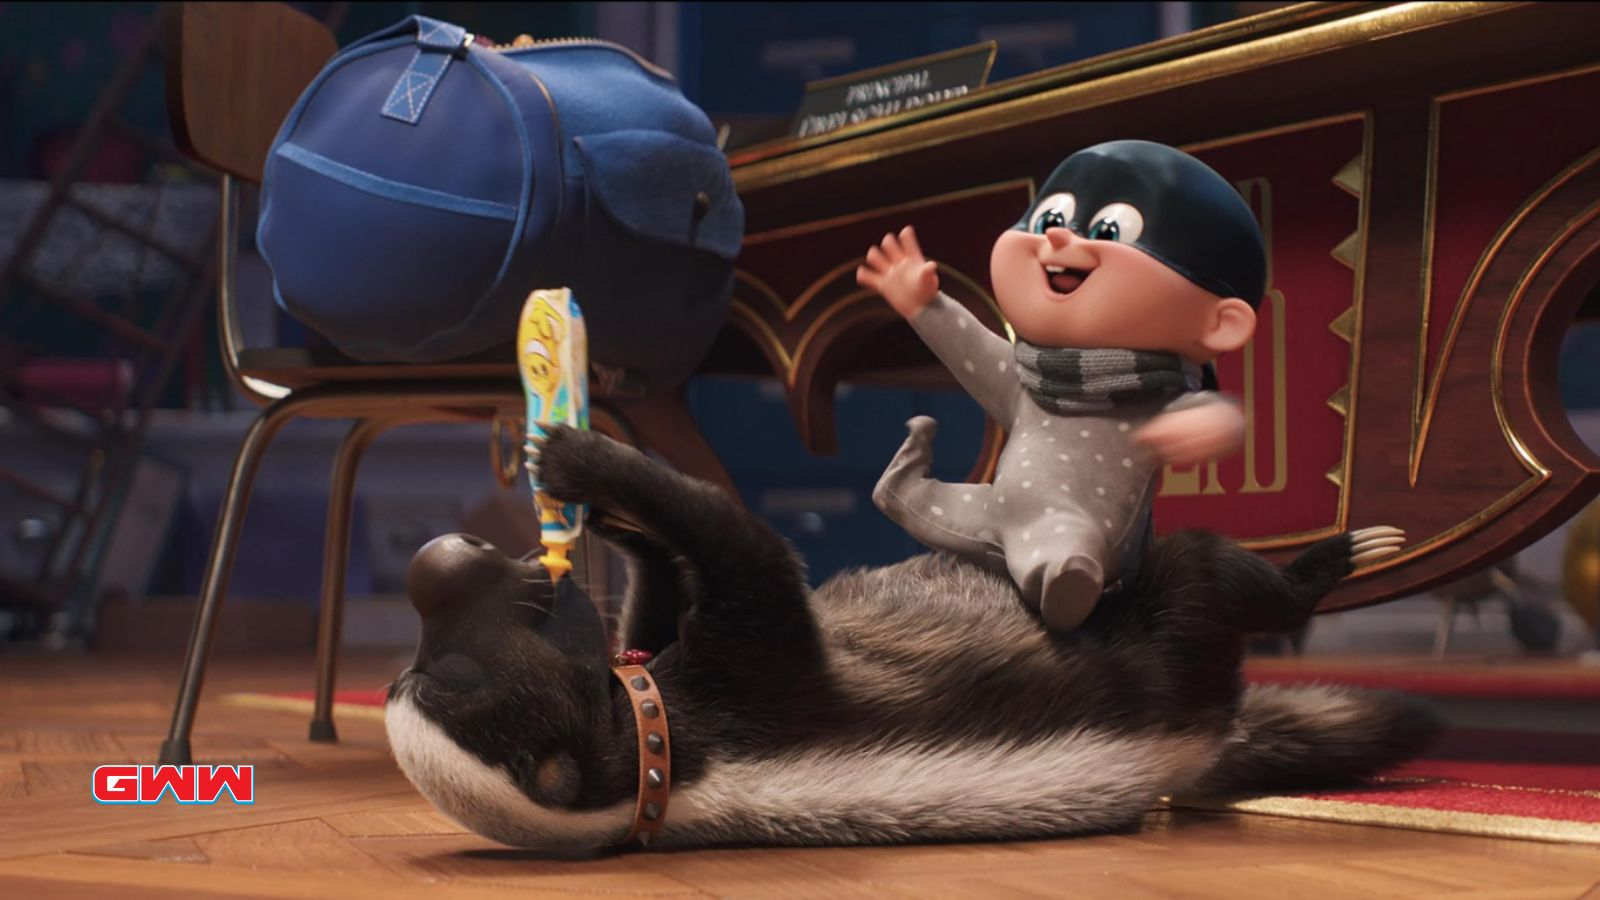 Baby Gru Jr. playing with a dog, Despicable Me 4 Release Date